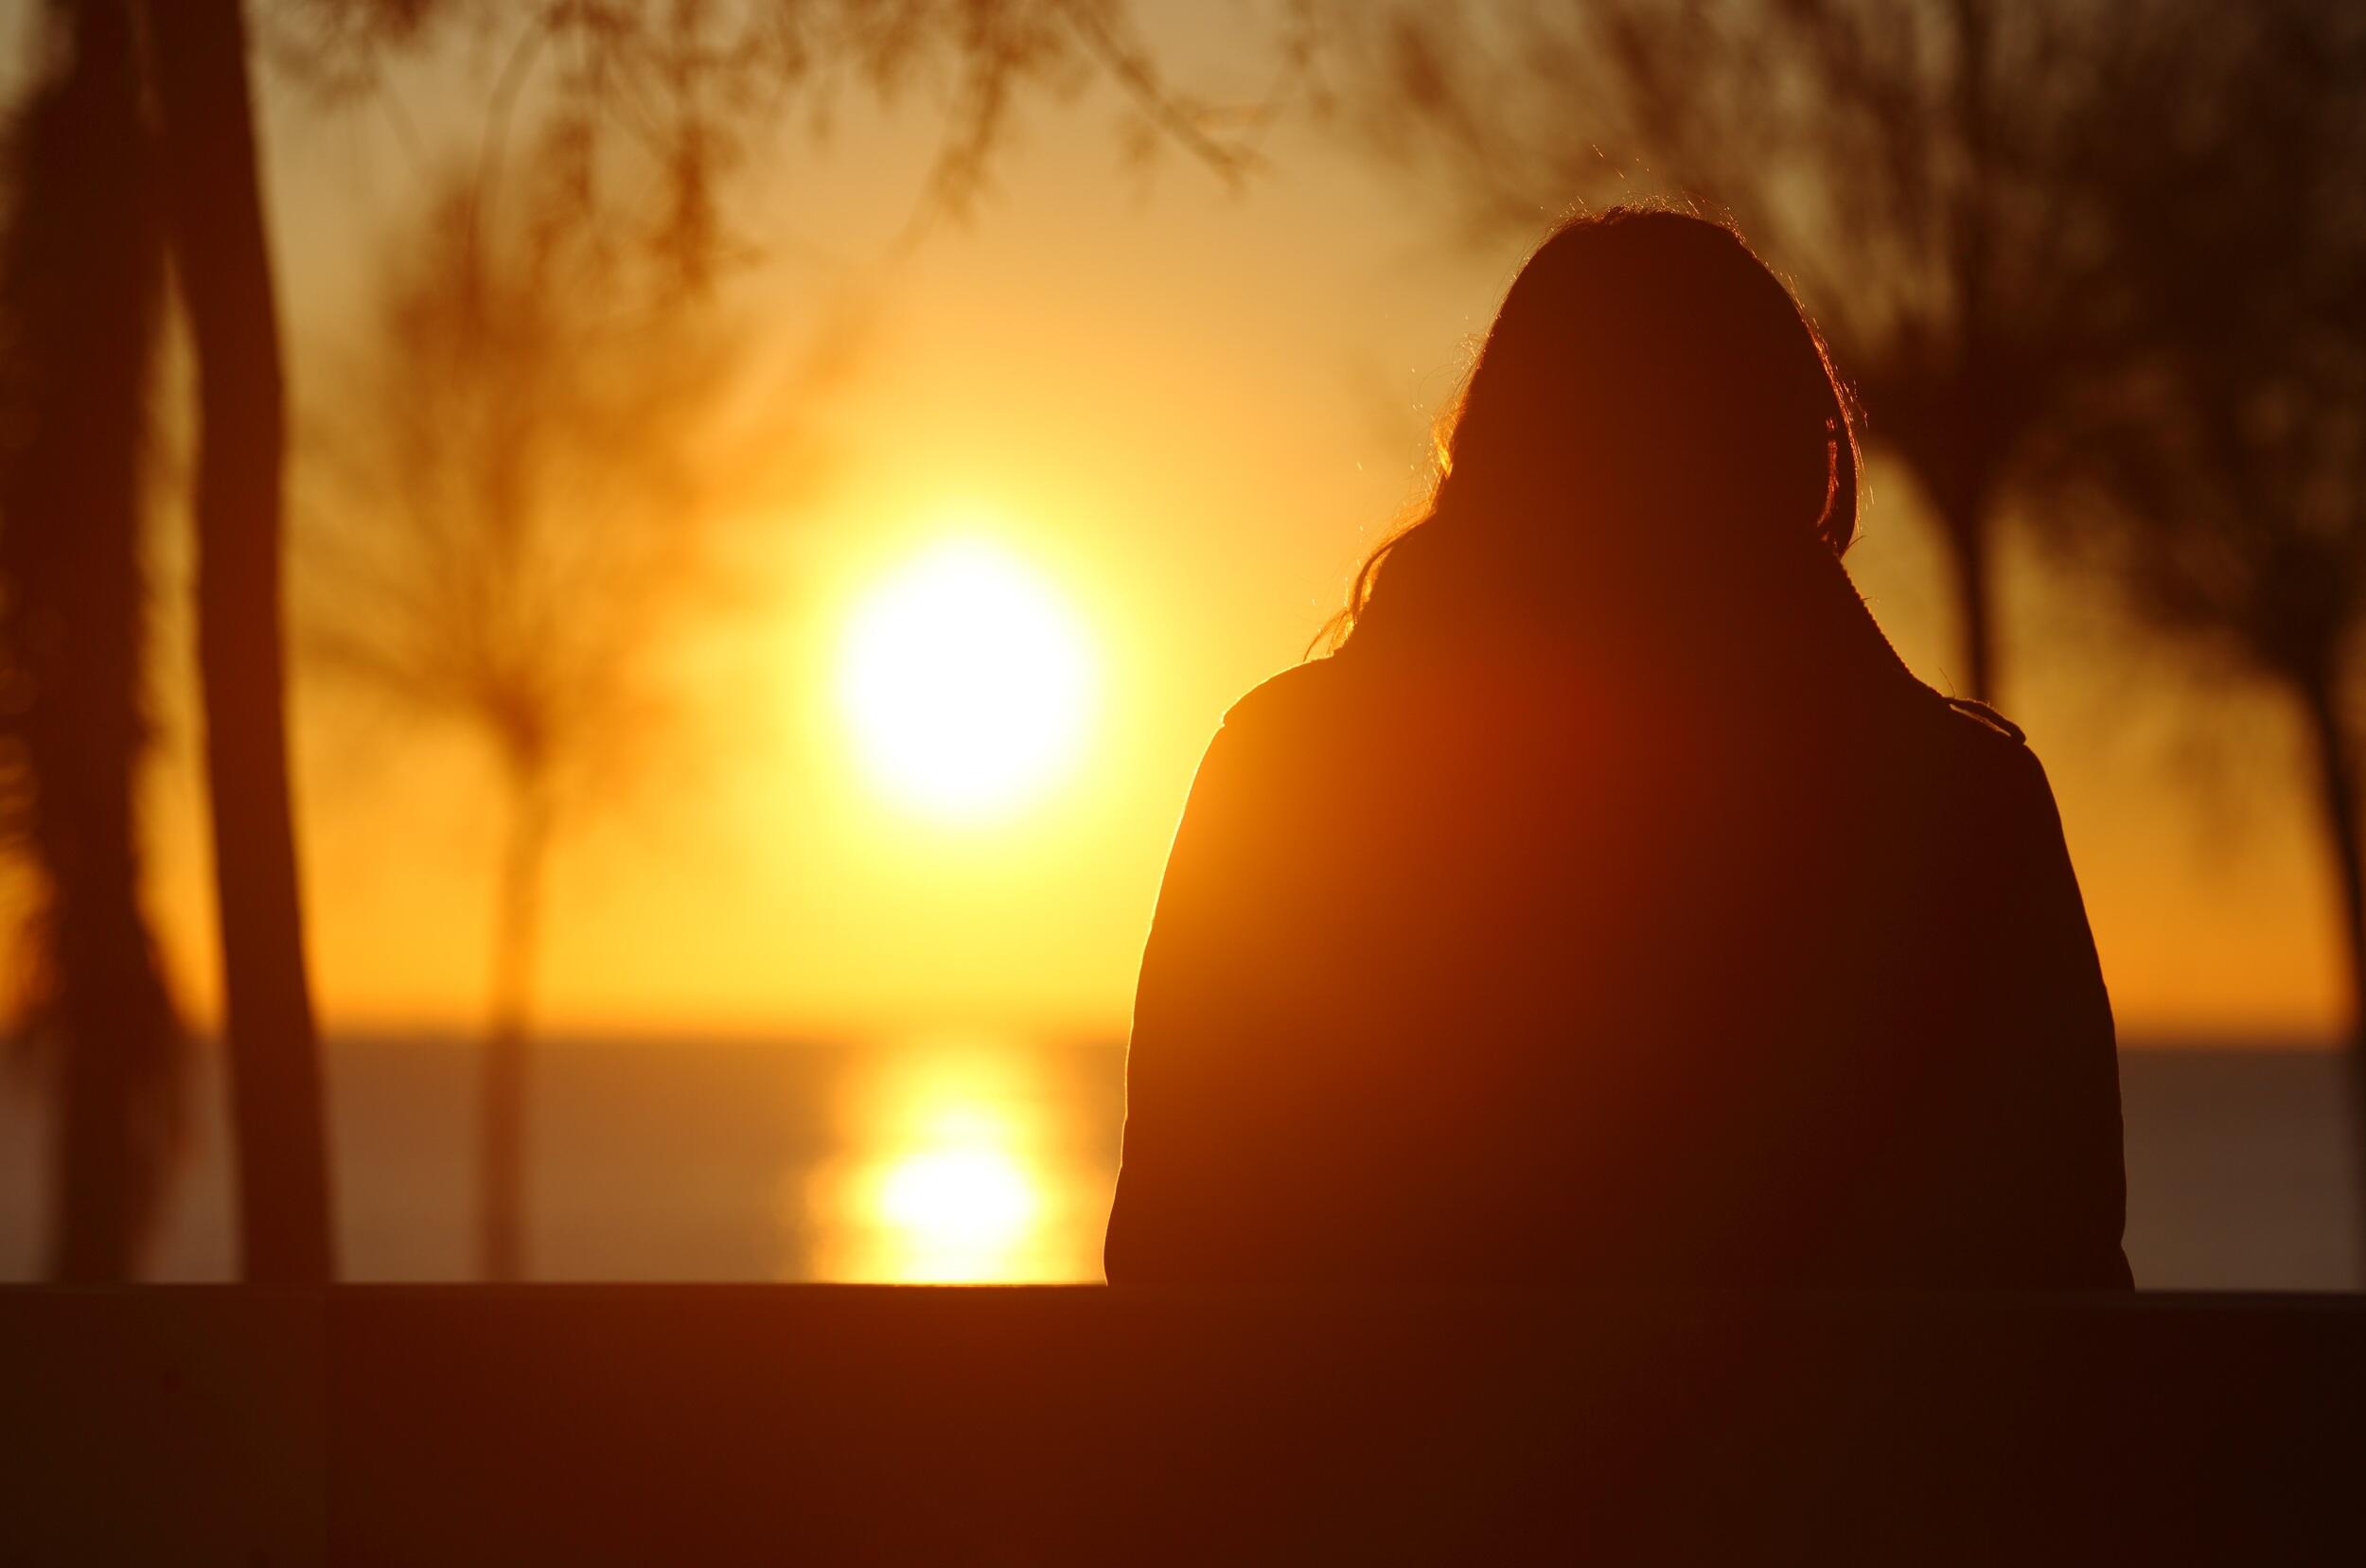 The silhouette of a person looking at the sun set over a lake 